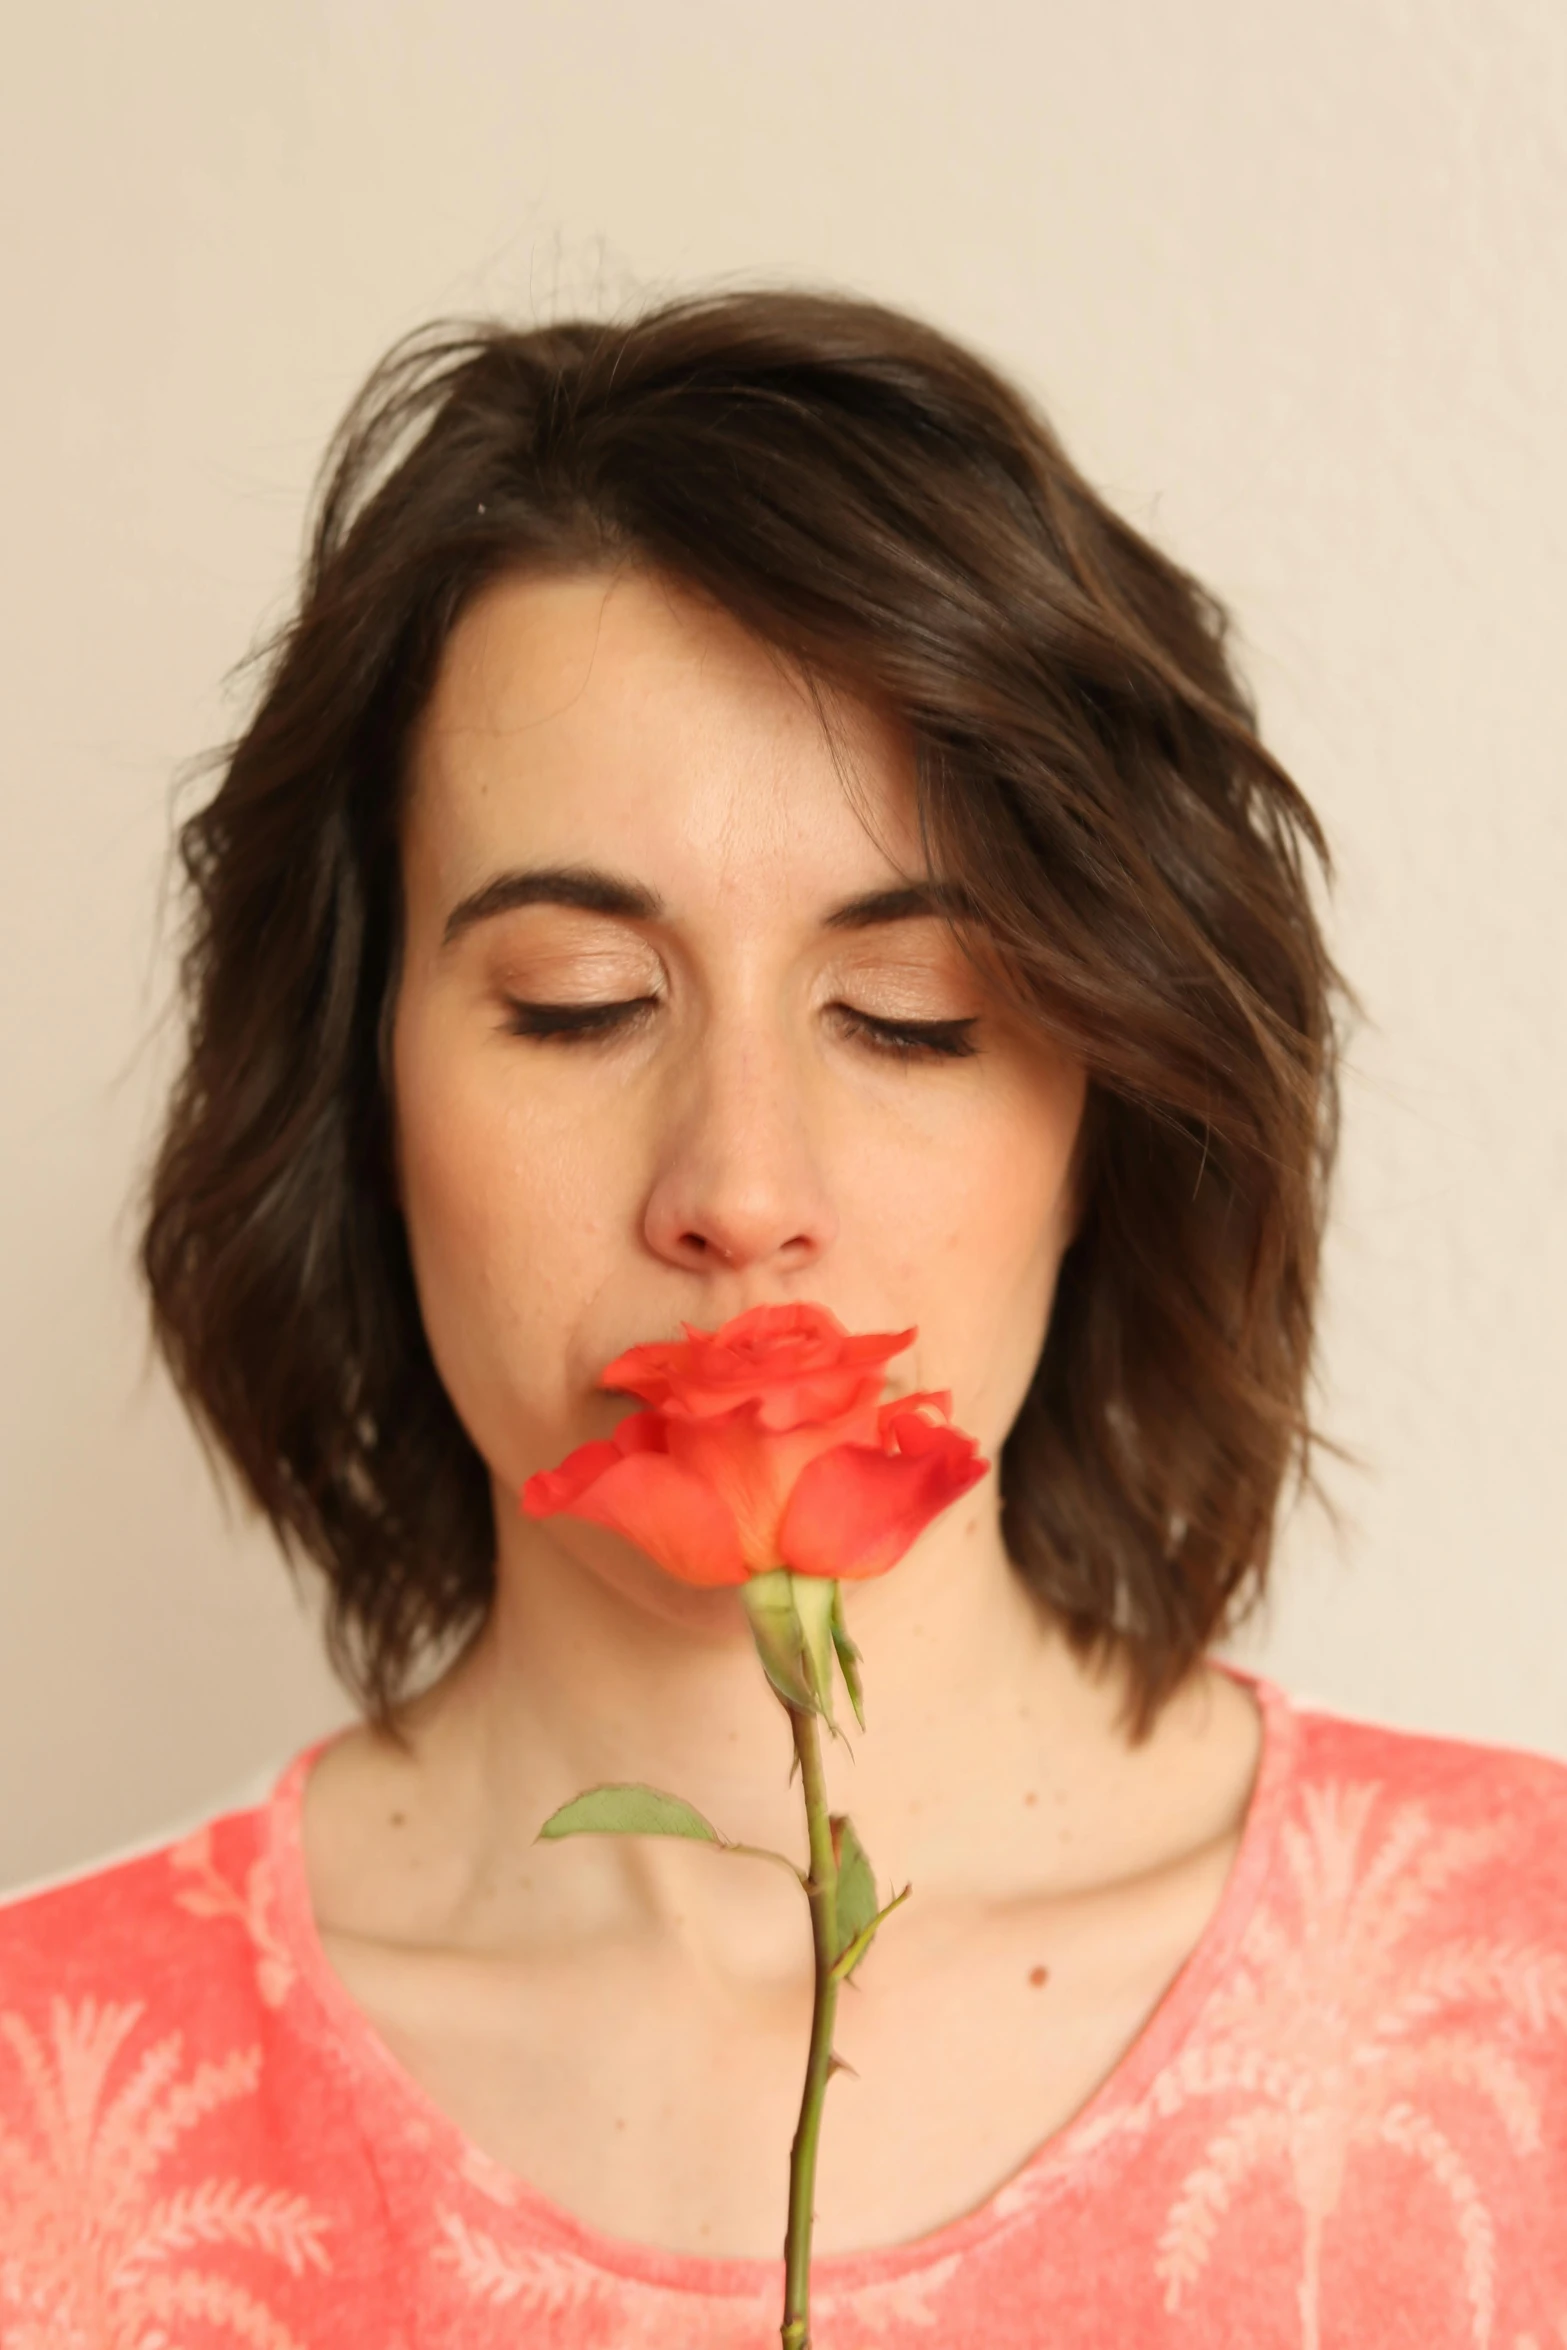 a person holding up a red rose to their mouth